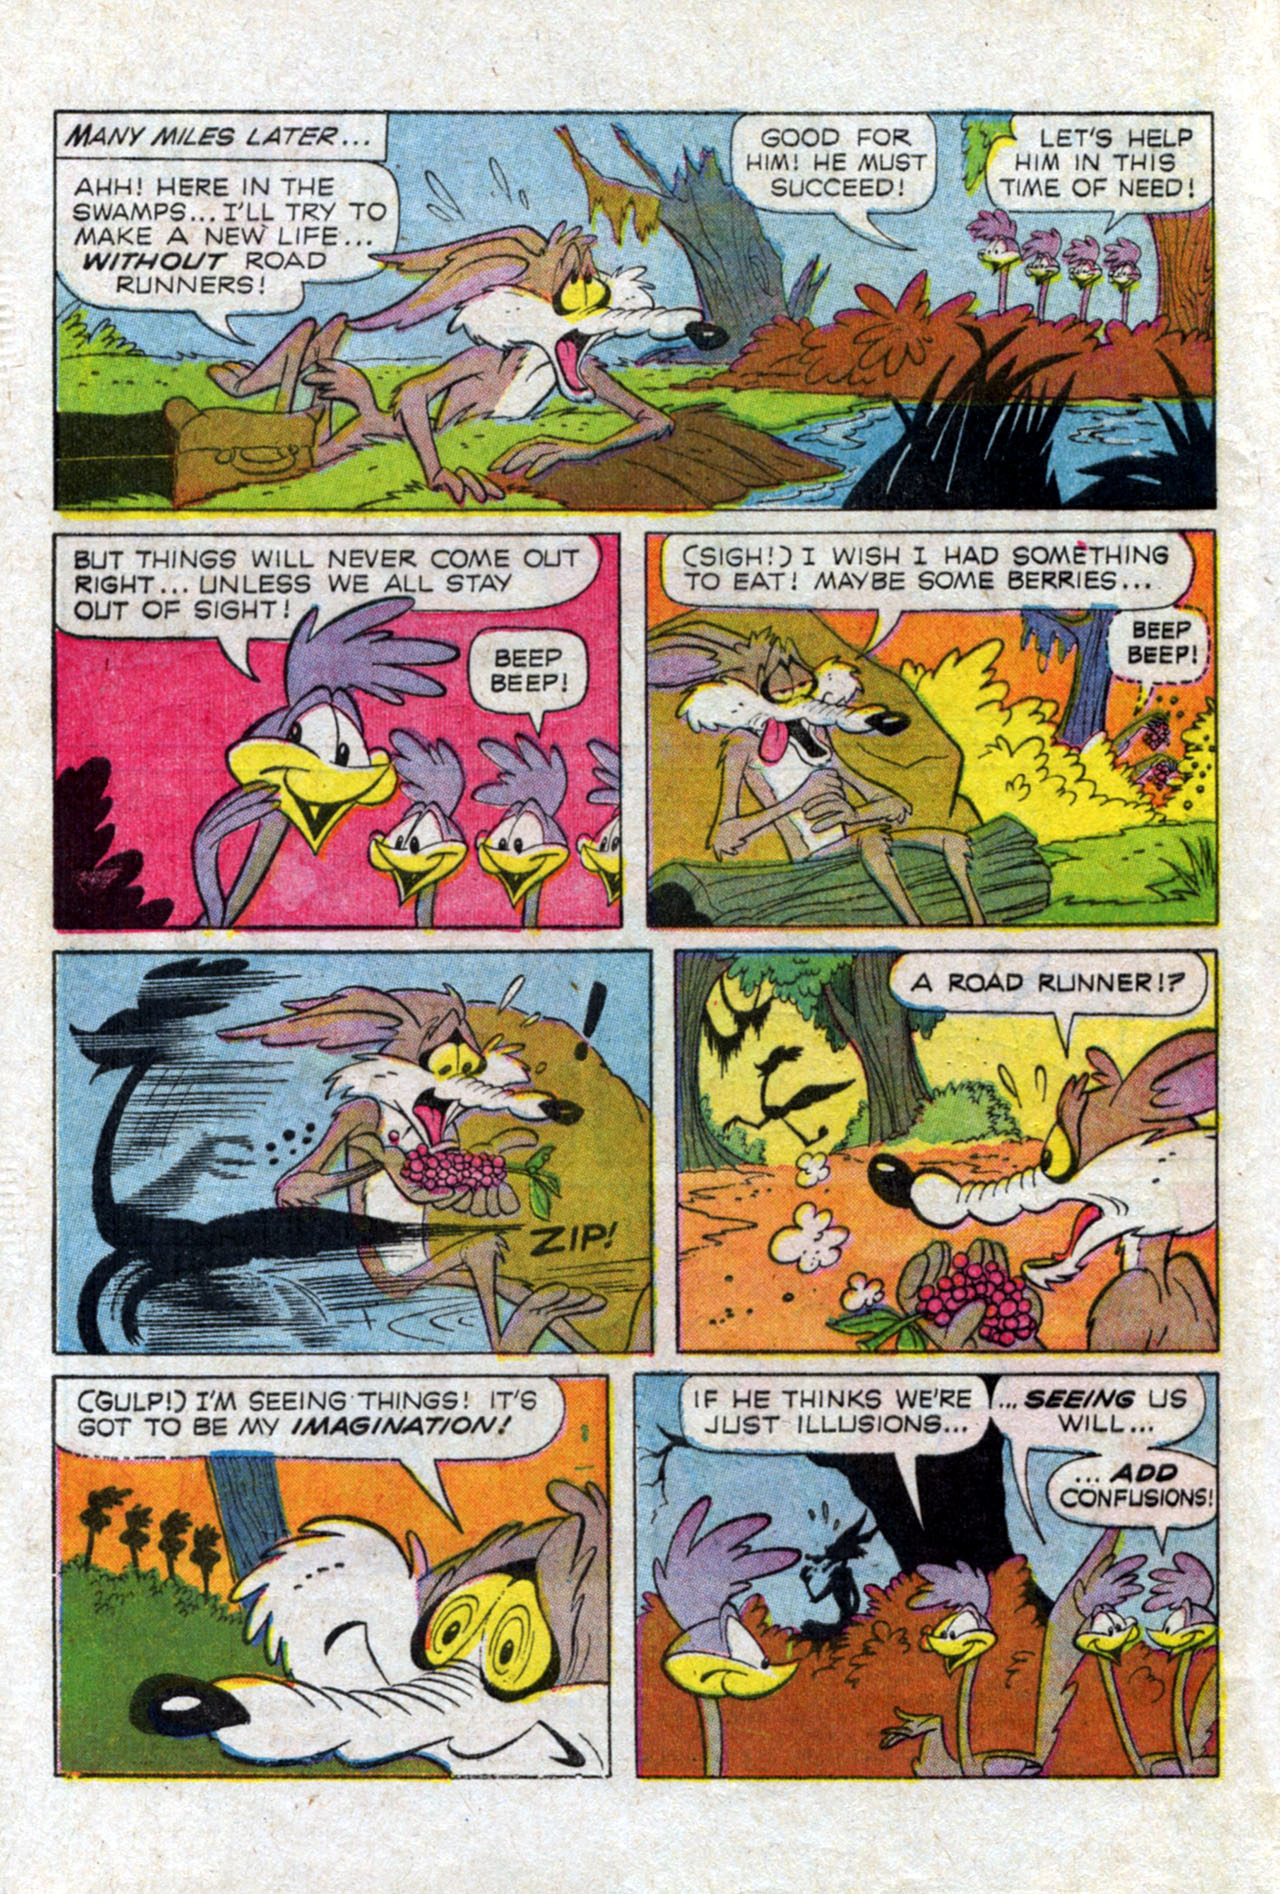 Read online Beep Beep The Road Runner comic -  Issue #18 - 4